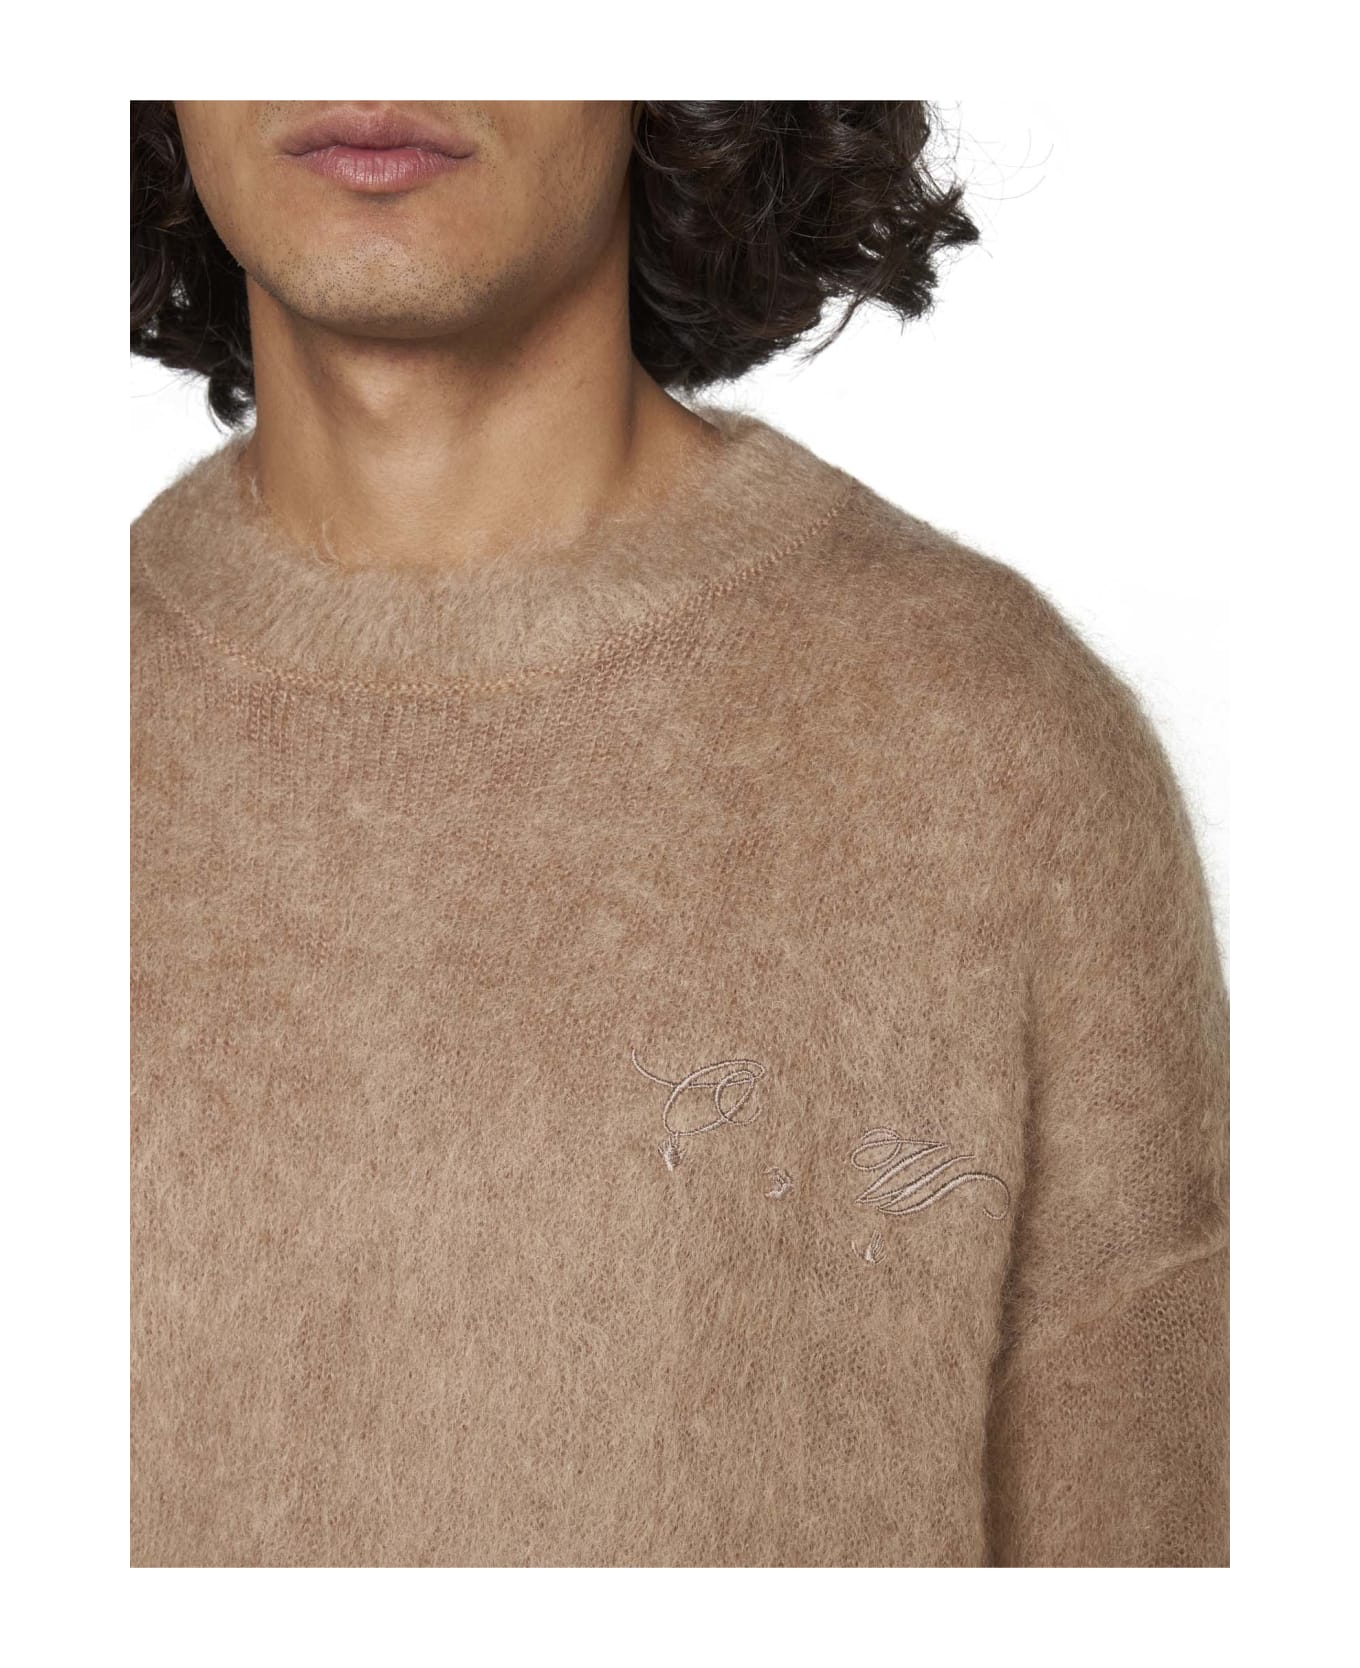 Off-White Sweater - Camel